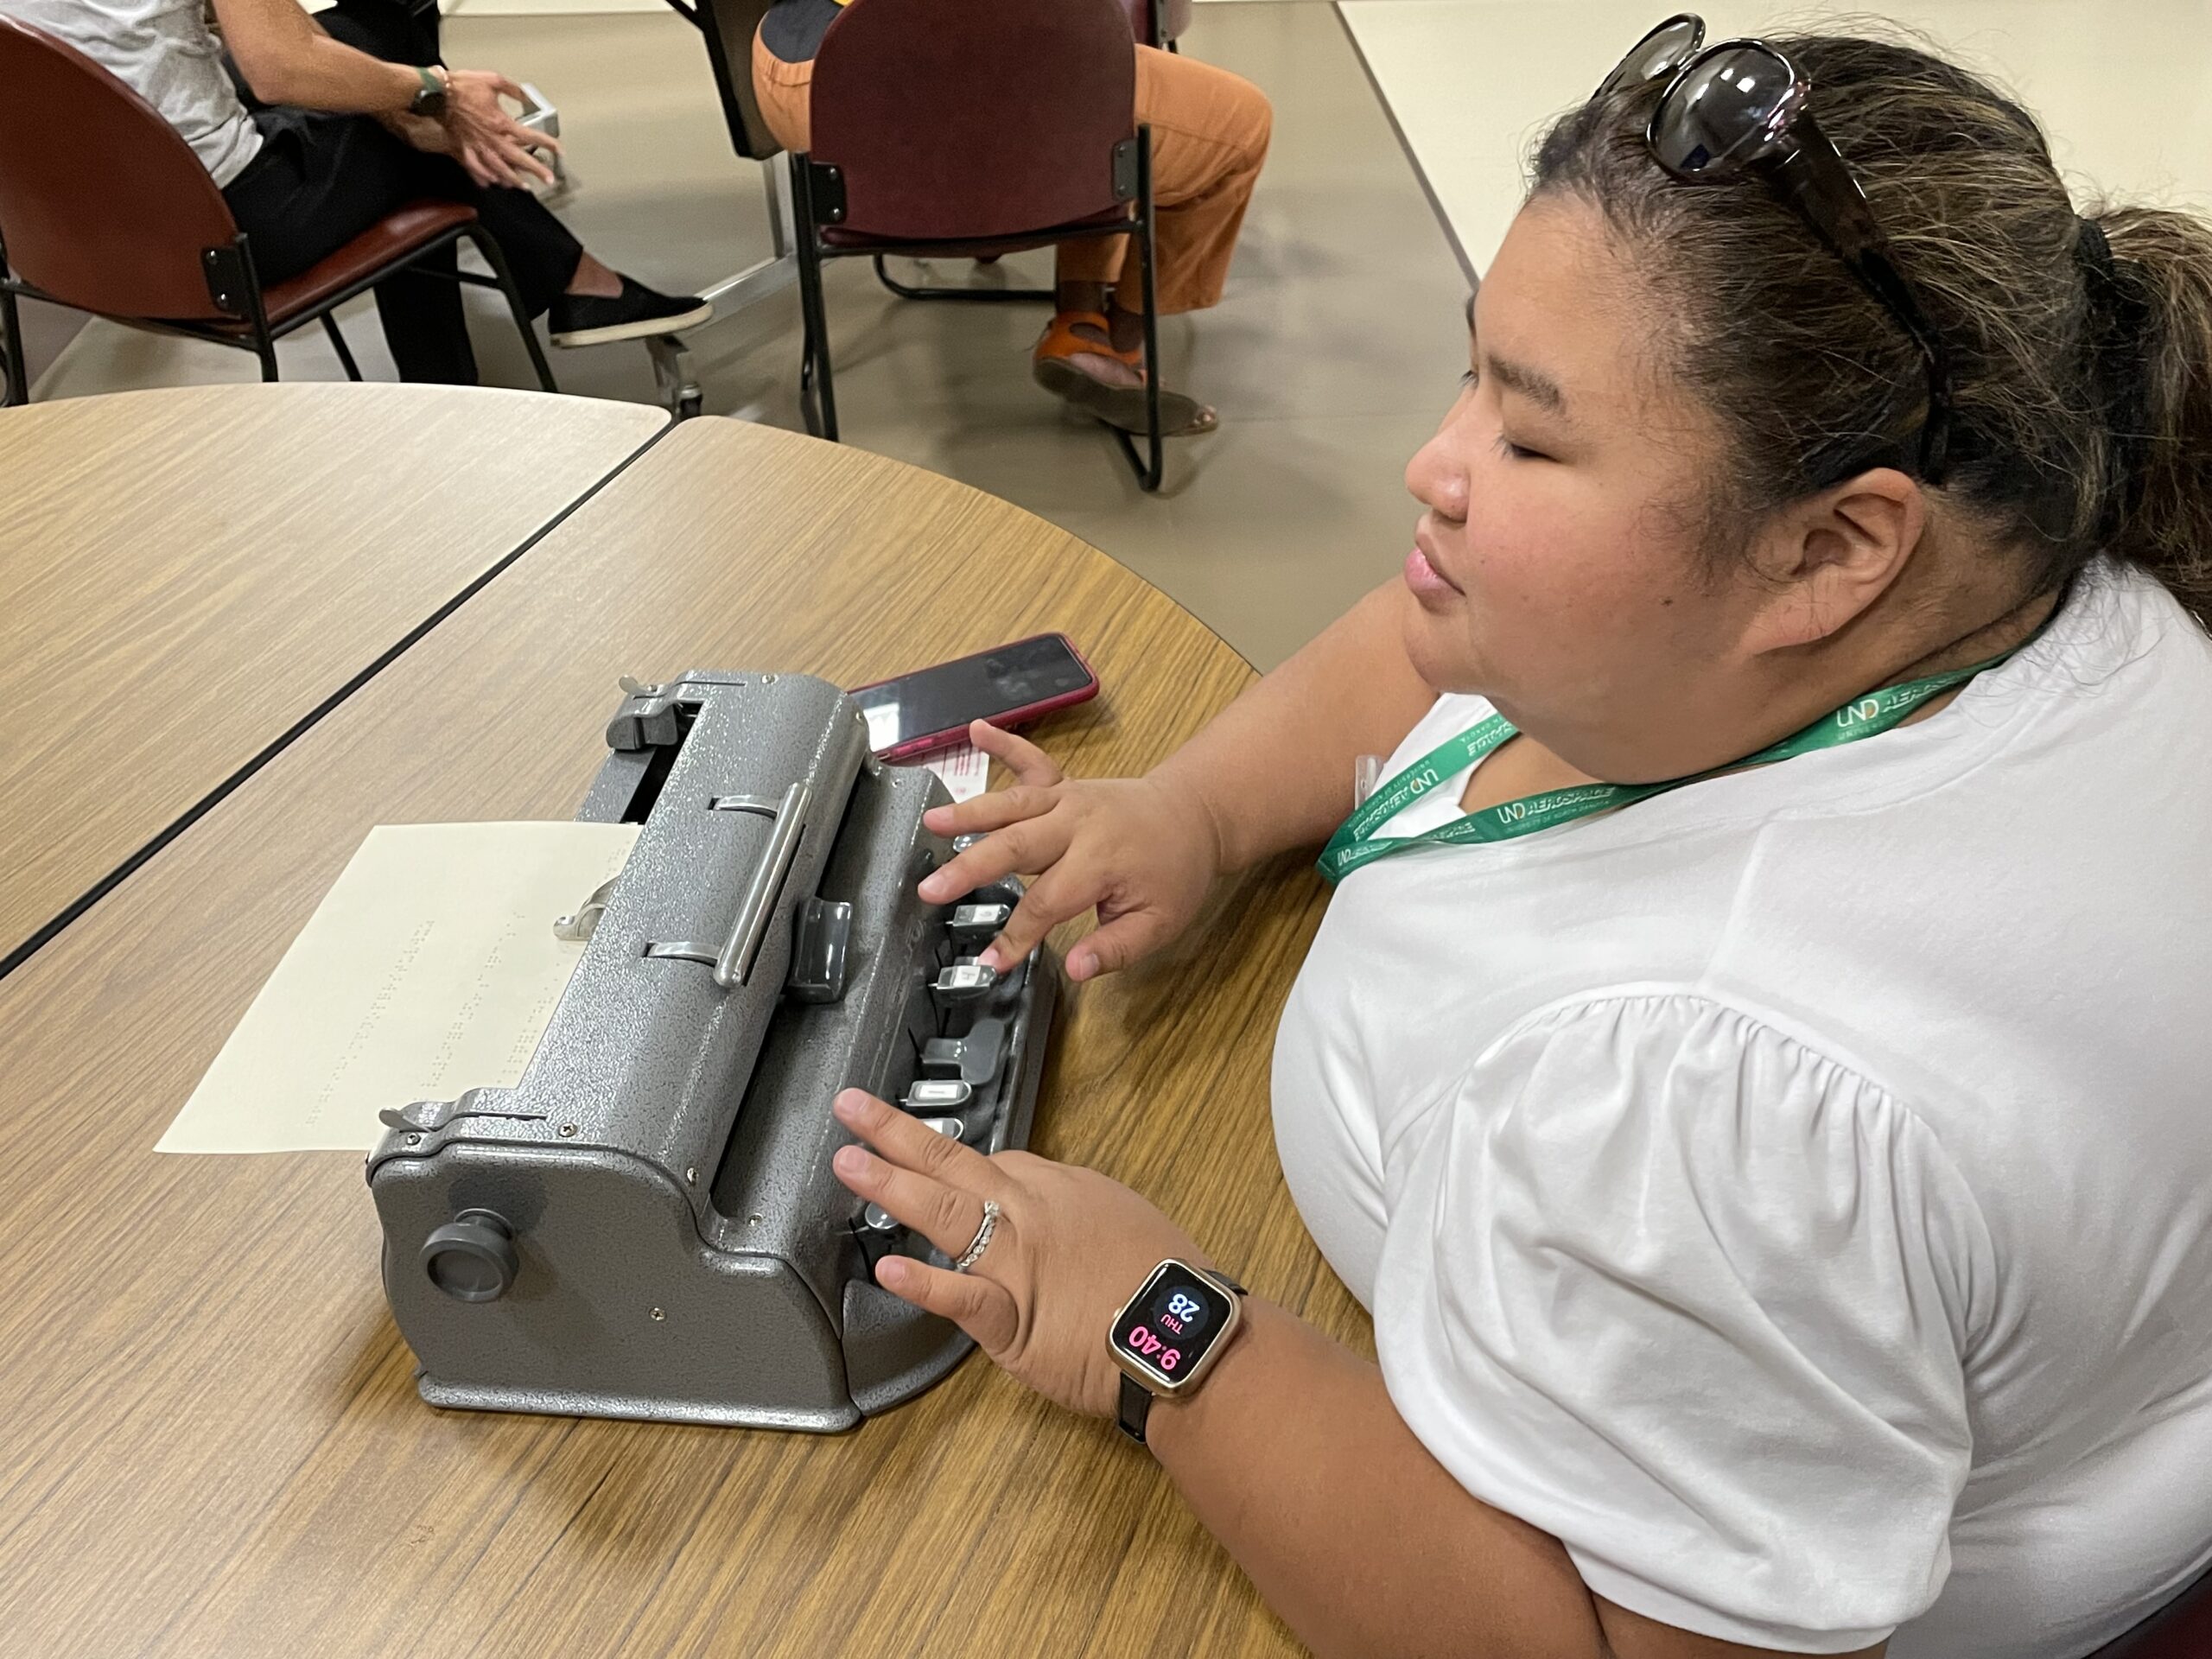 Woman closes her eyes to type on a braille keyboard